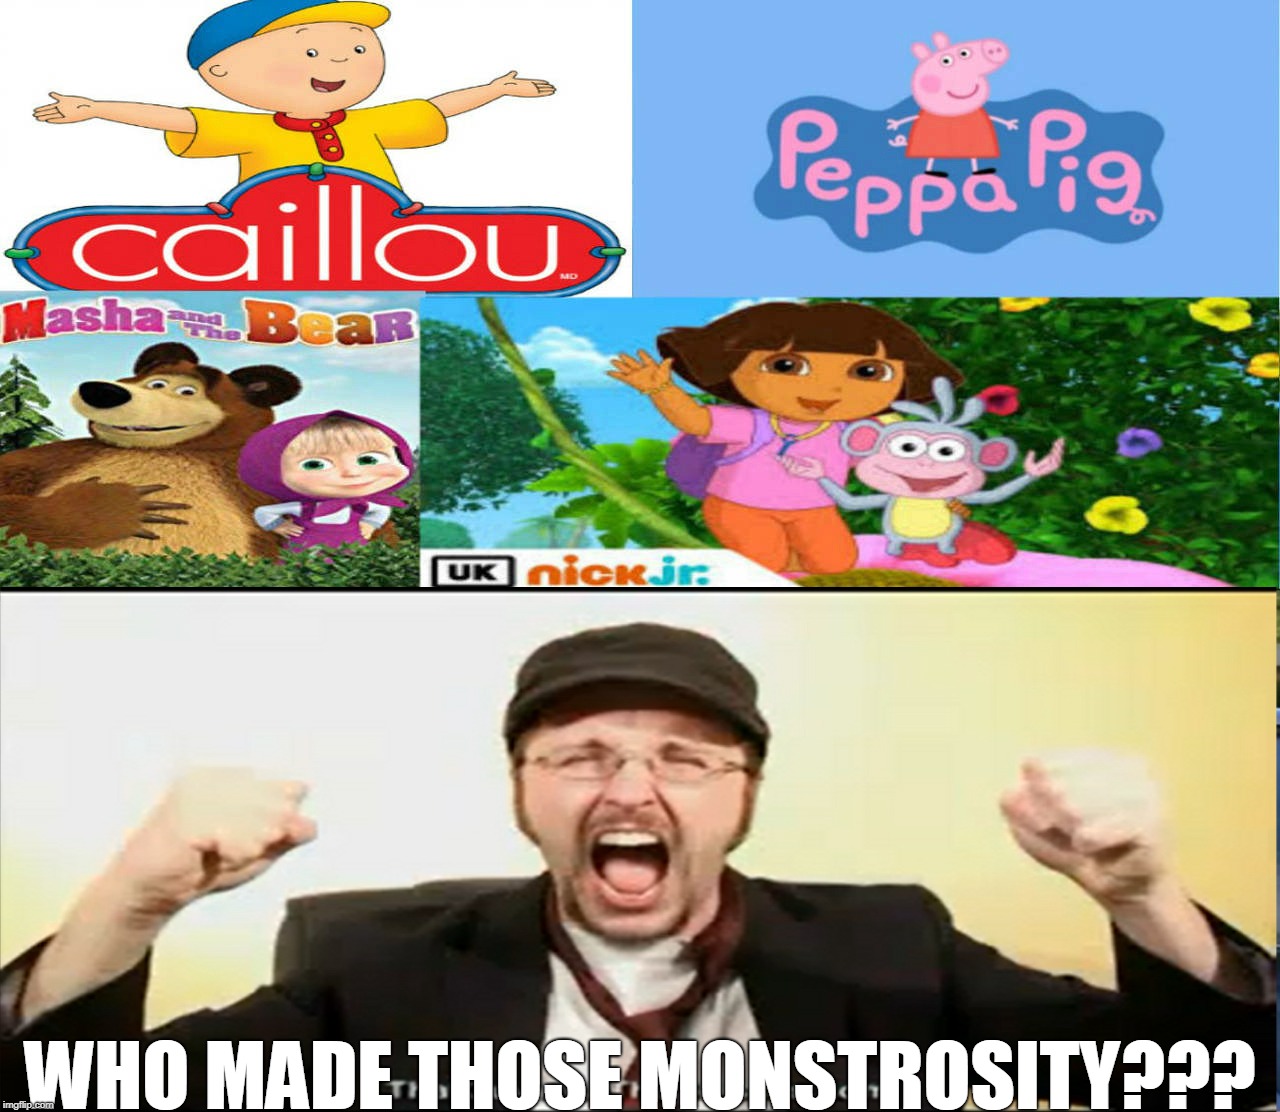 Nostalgia Critic Reacts To Those Stupid Shows | WHO MADE THOSE MONSTROSITY??? | image tagged in memes,dora the explorer,masha and the bear,caillou,peppa pig,nostalgia critic | made w/ Imgflip meme maker